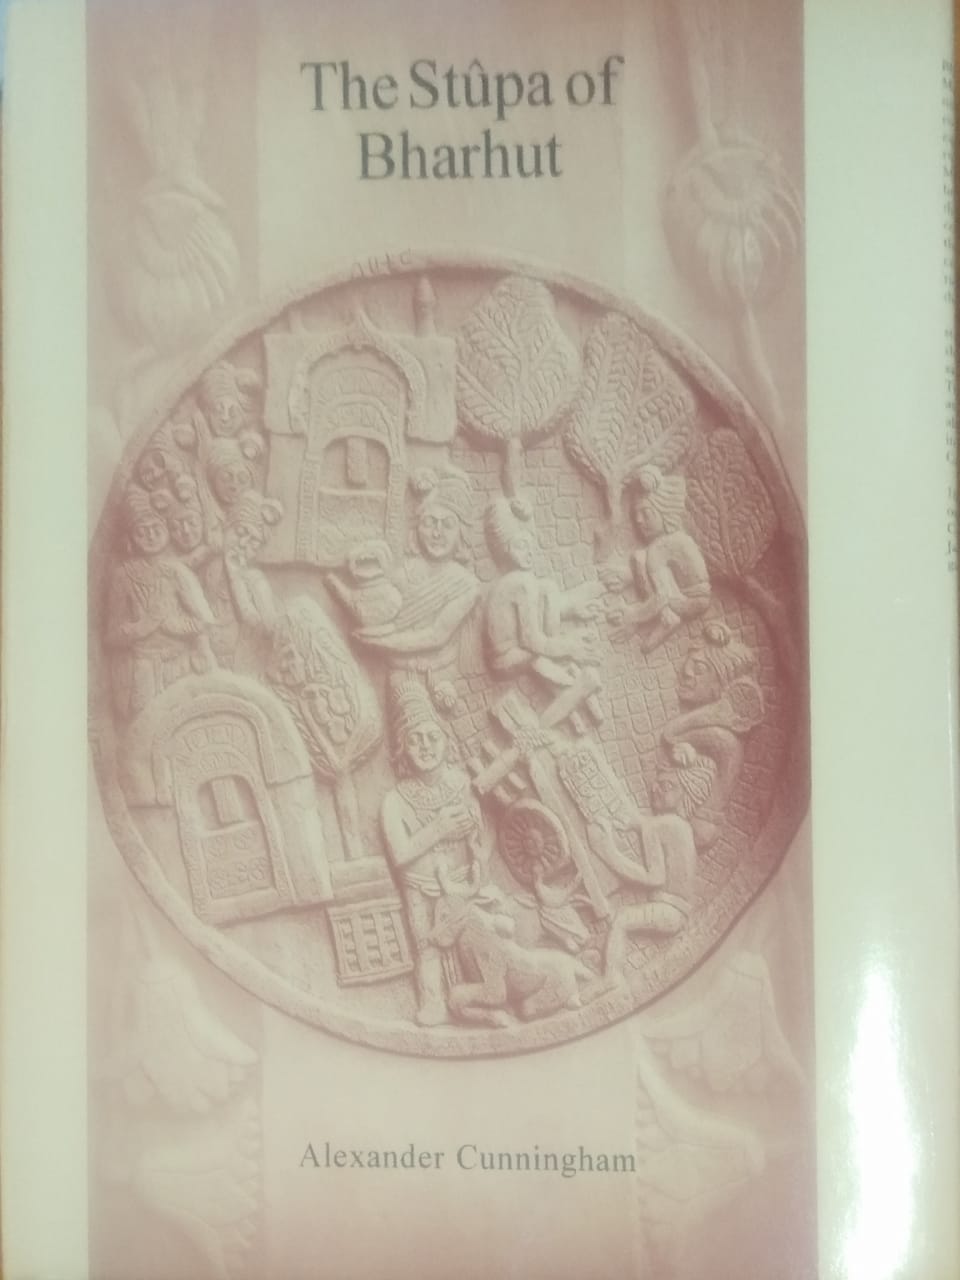 The Stupa of Bharhut: A Buddhist Monument ornamented with Numerous Sculptures illustrative of Buddhist Legend and History in the Third Century BC